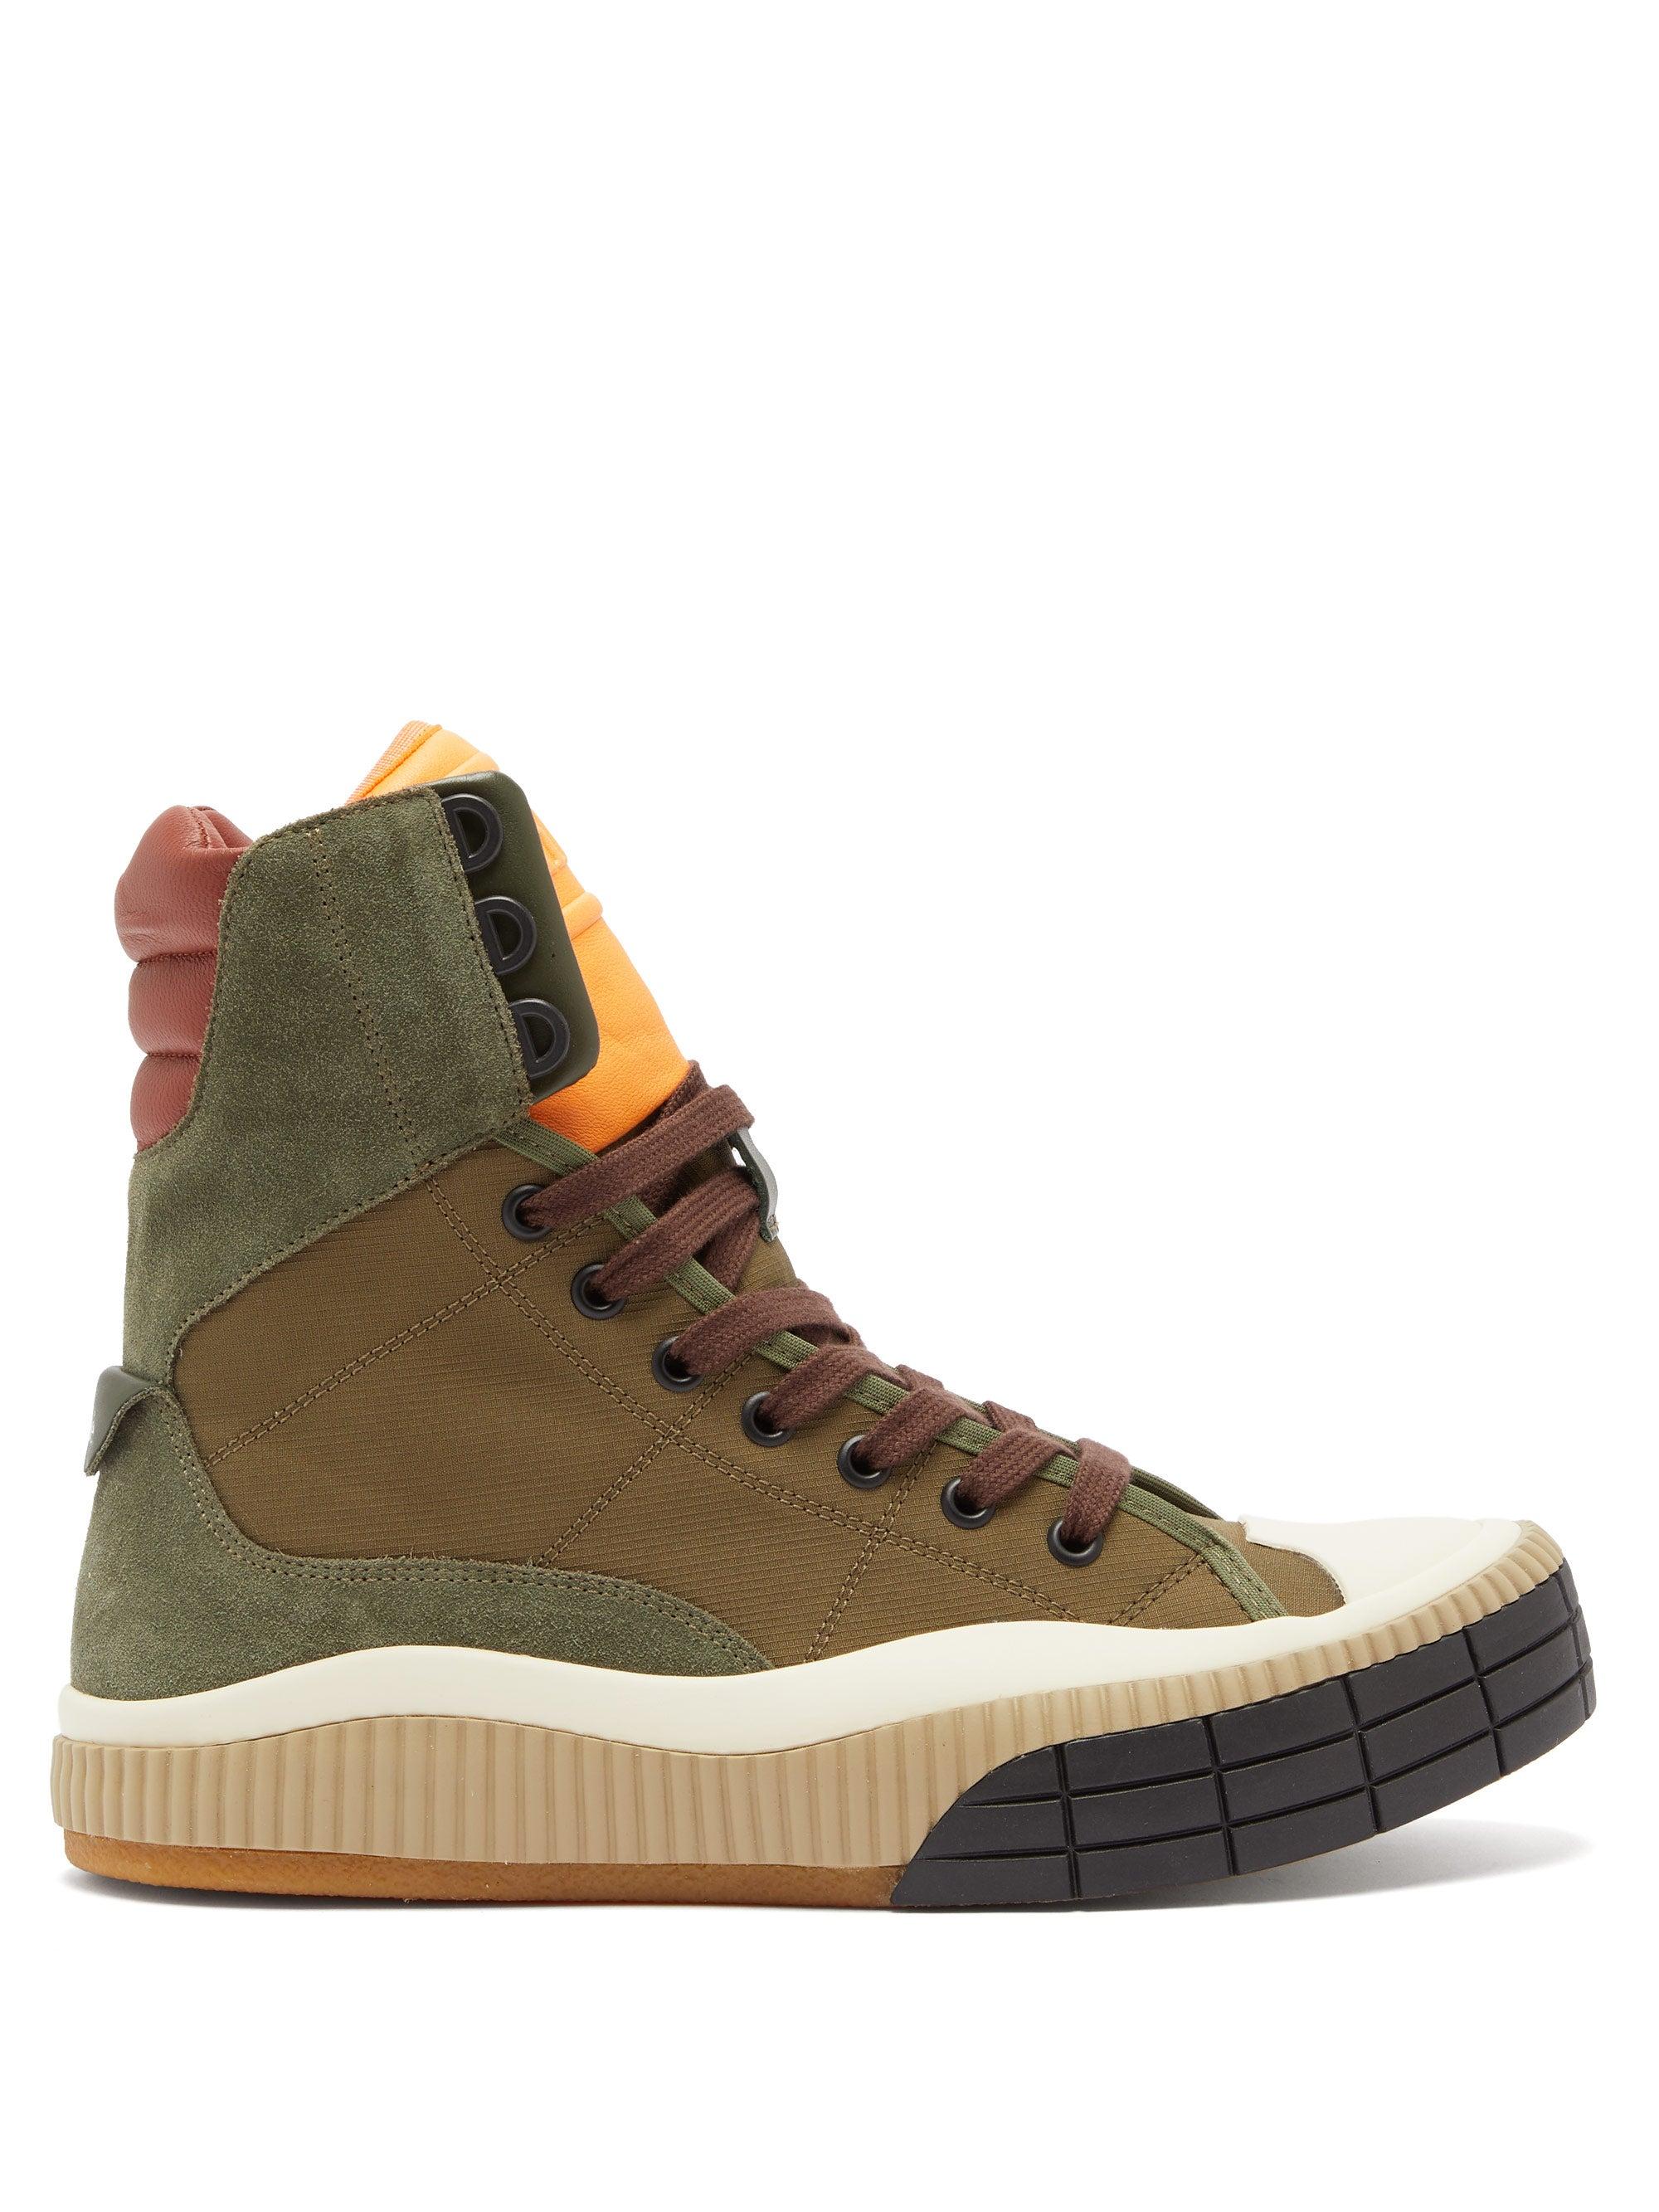 Chloé Clint Suede-trim Canvas High-top Trainers in Natural - Lyst